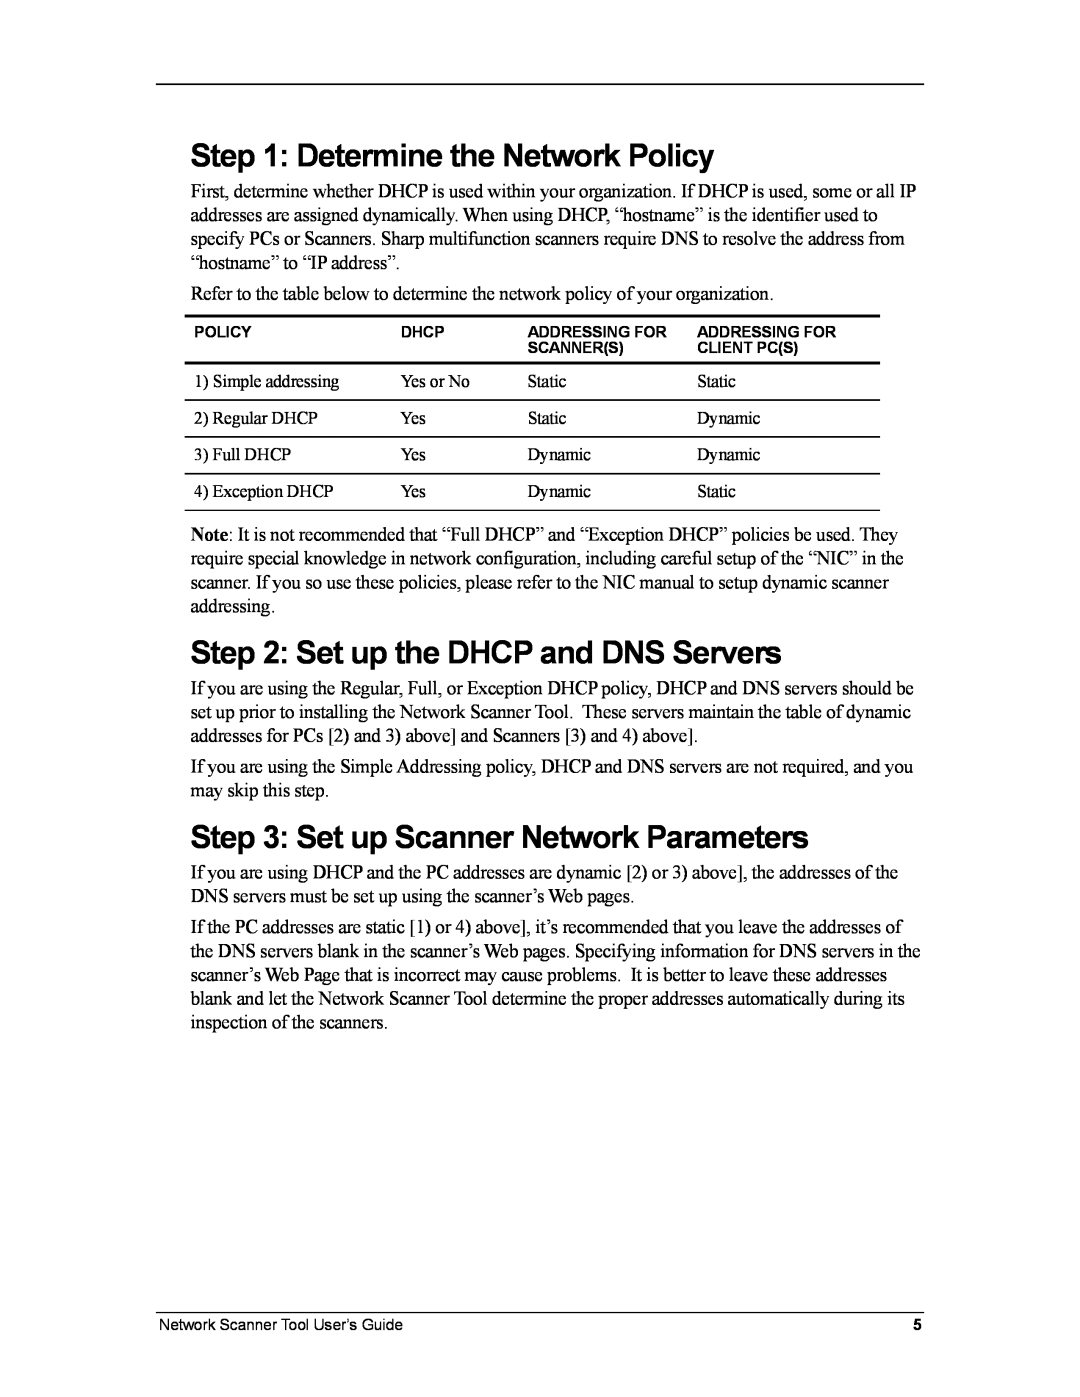 Sharp R3.1 manual Determine the Network Policy, Set up the DHCP and DNS Servers, Set up Scanner Network Parameters 